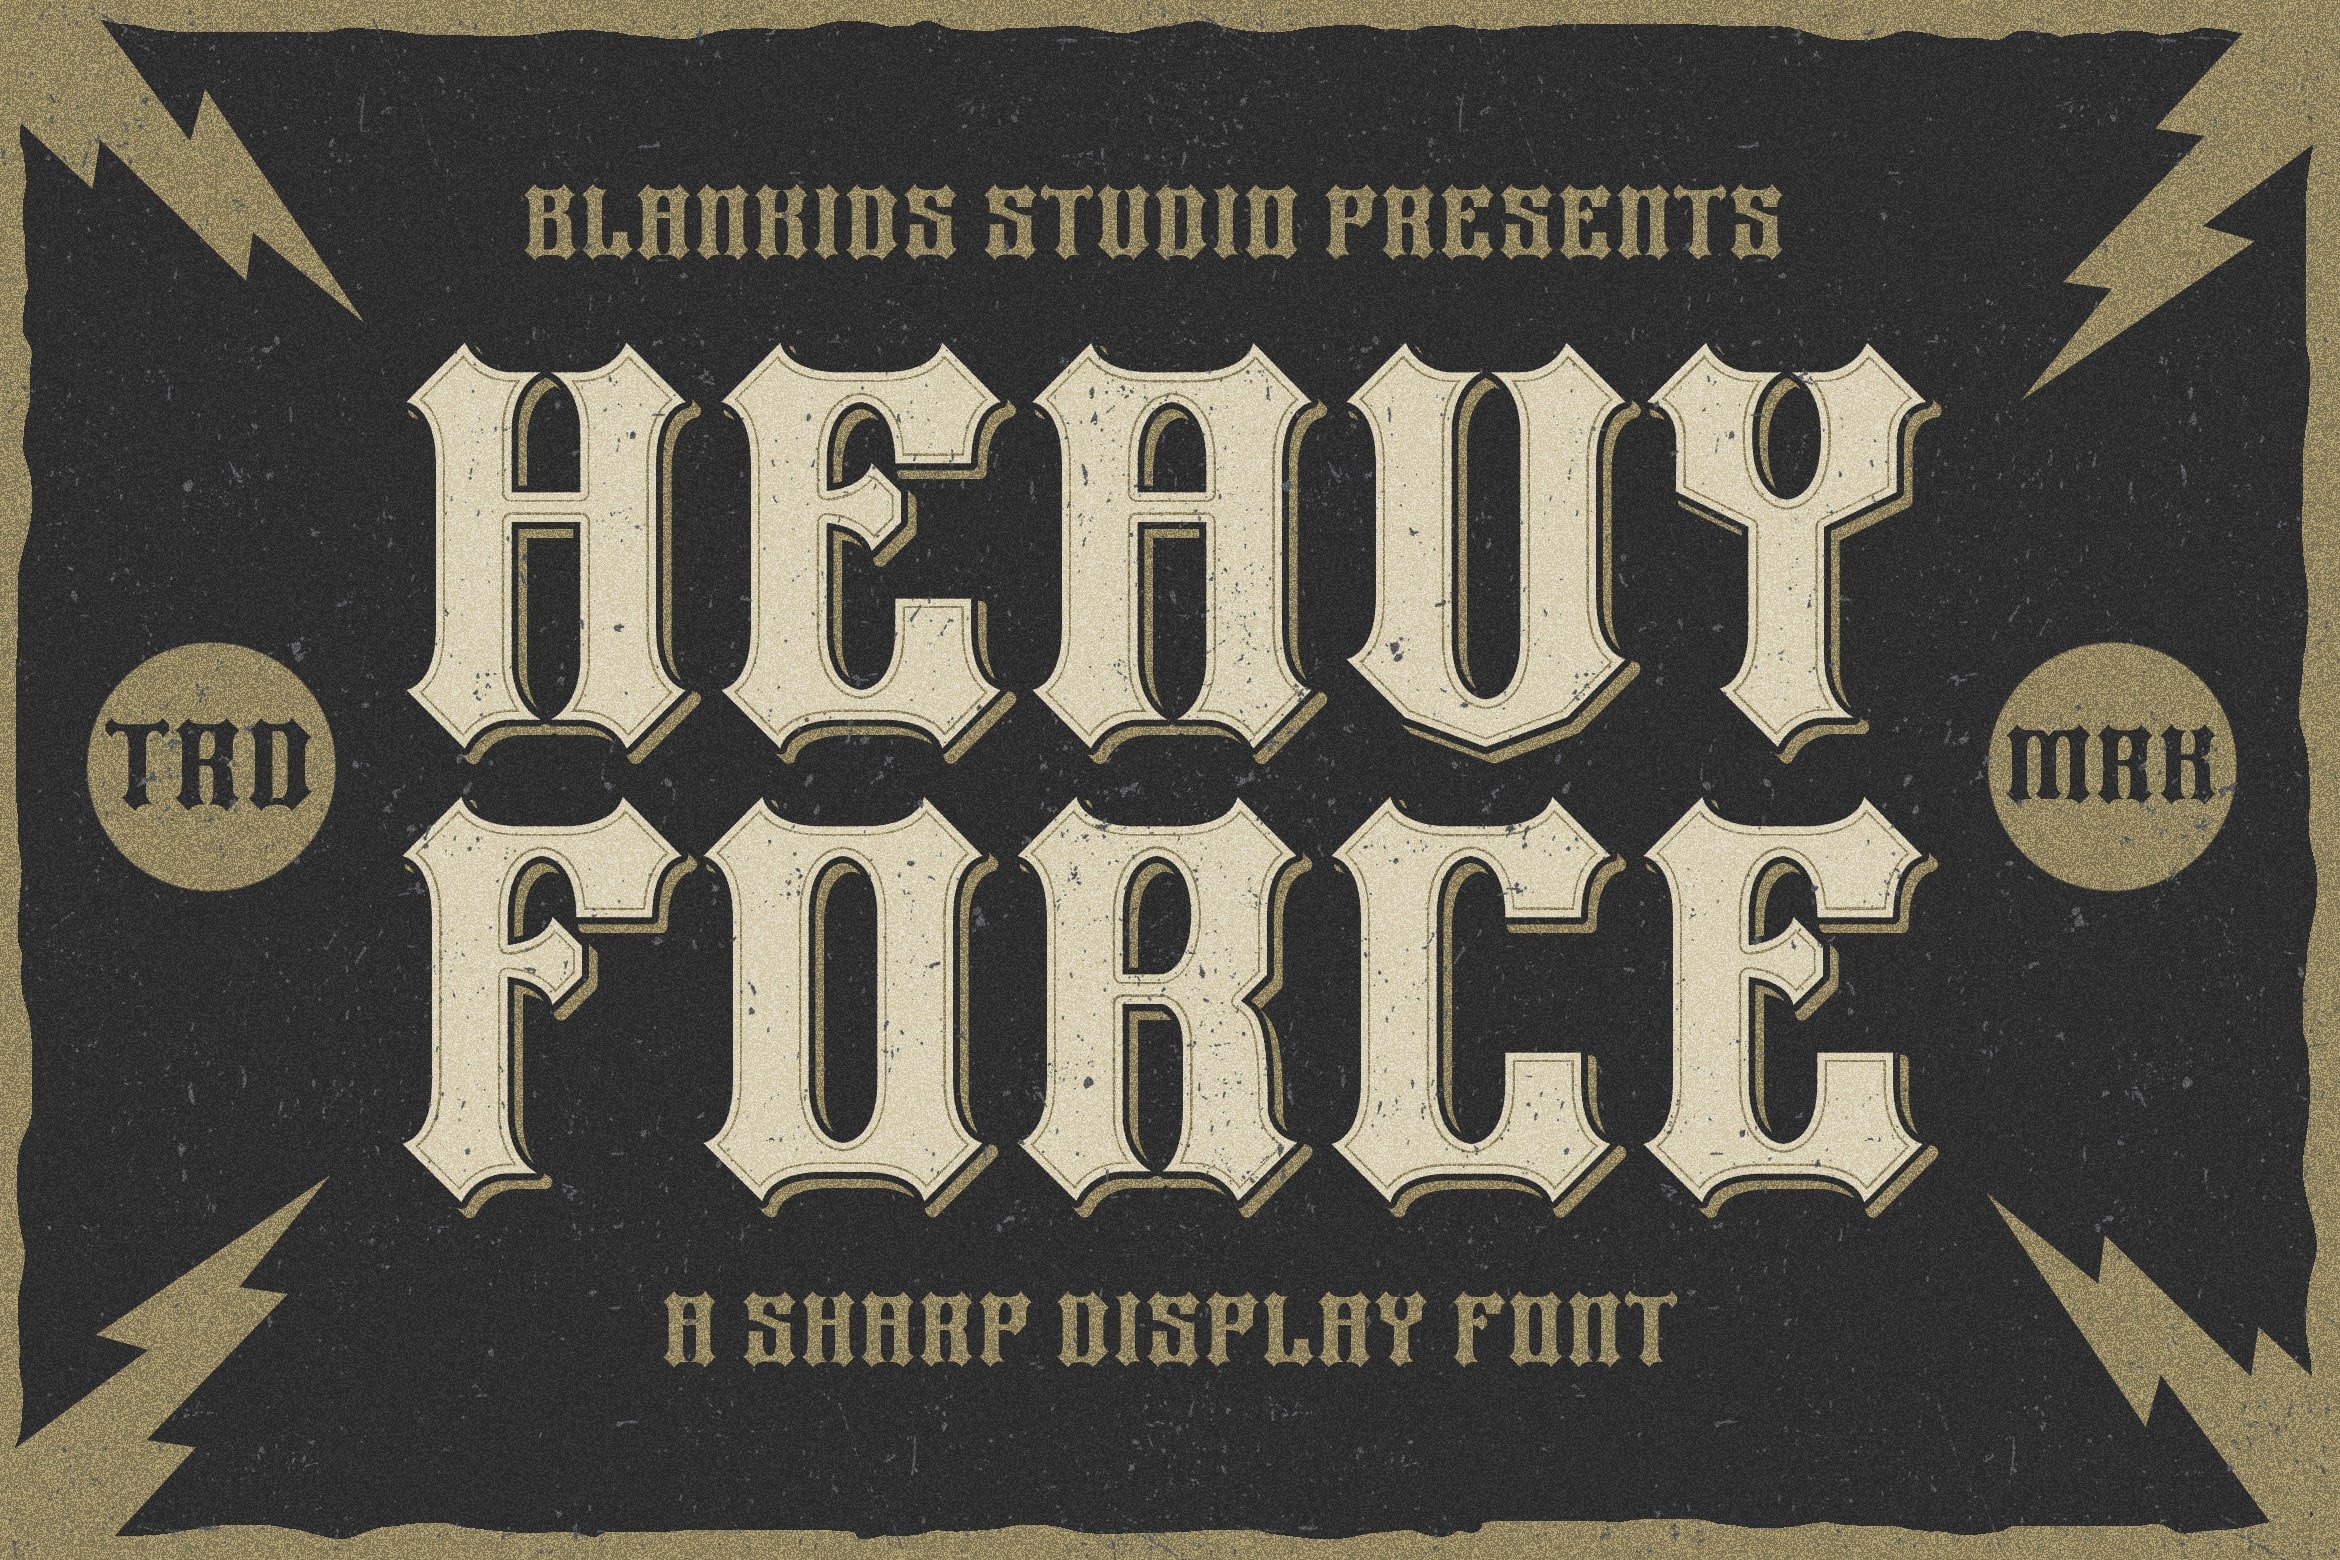 Heavy Force a Sharp Display Fontcover image.